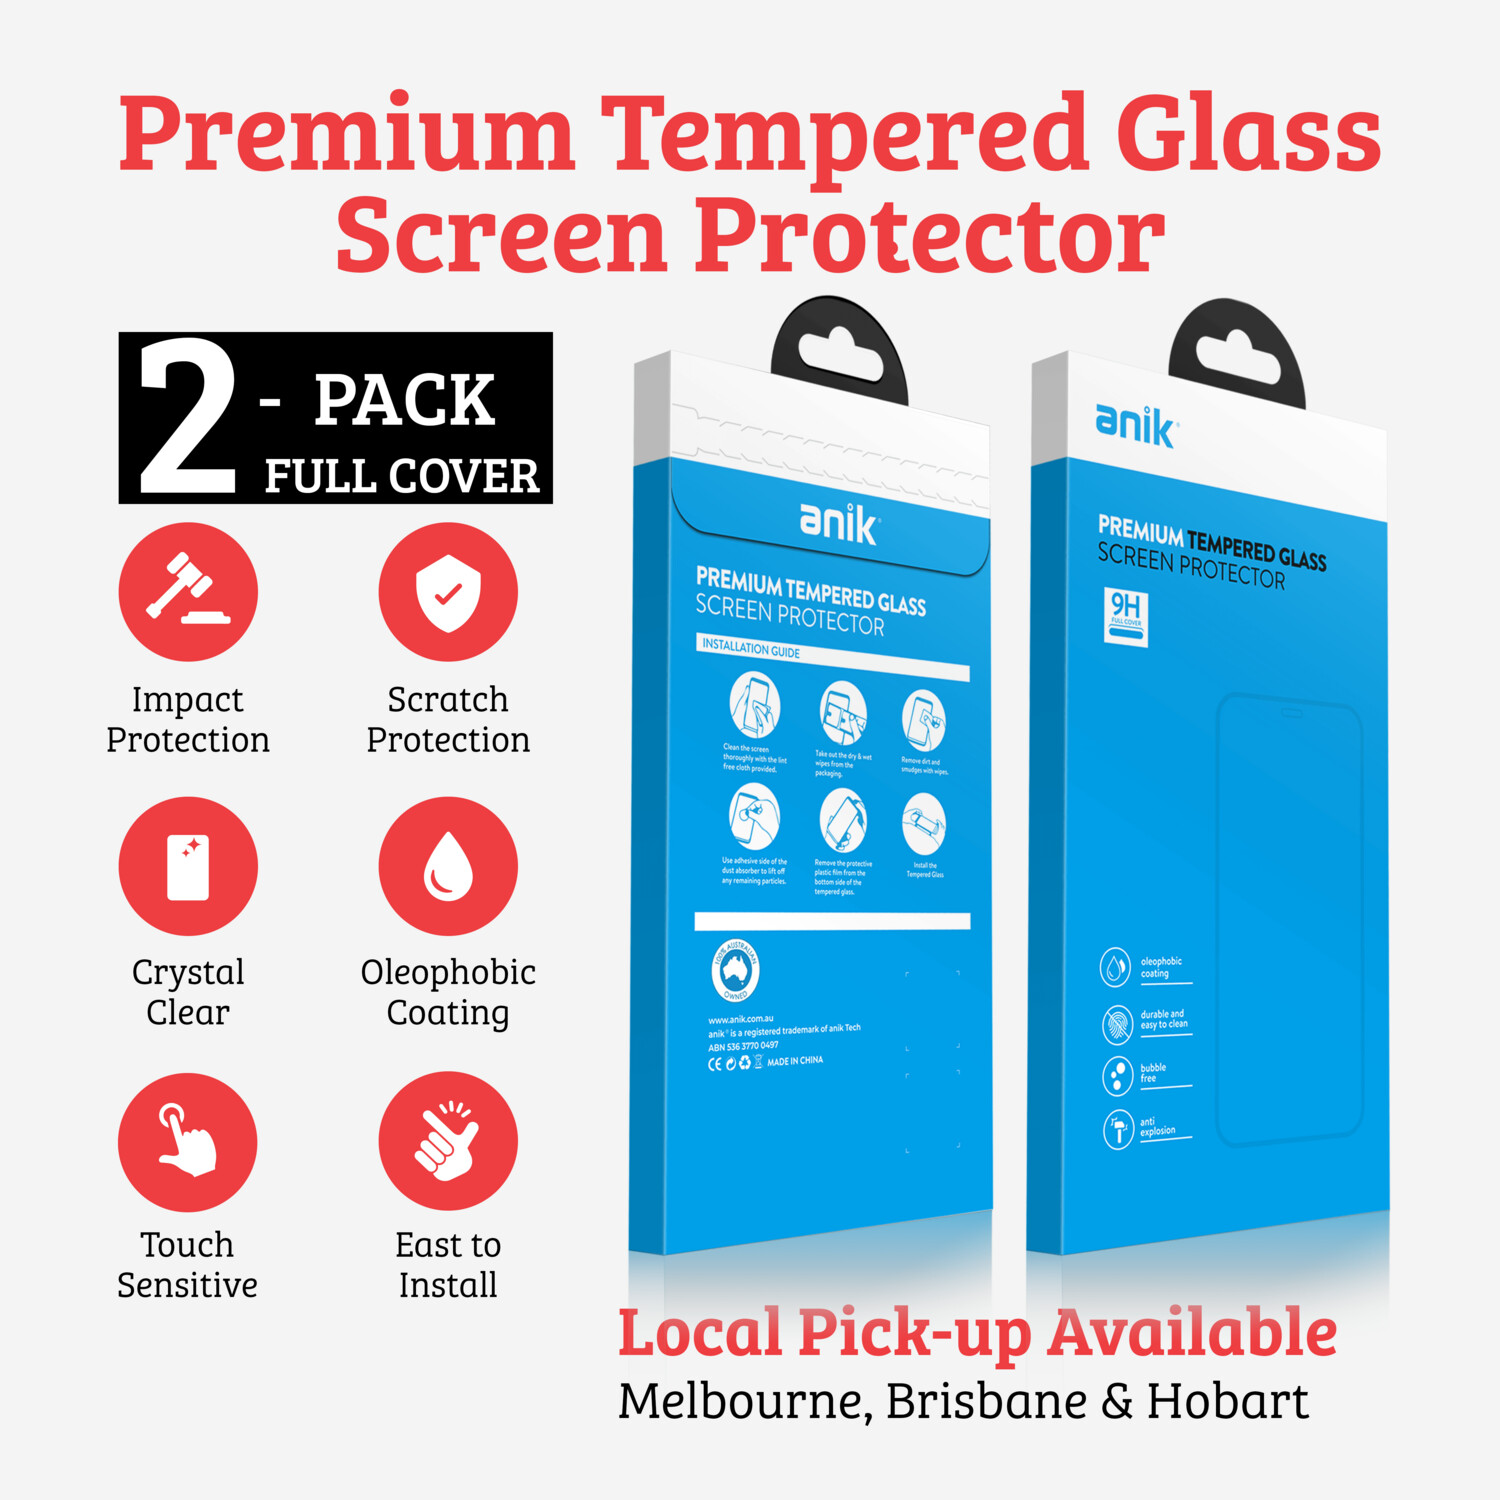 ANIK Premium Full Cover Tempered Glass Screen Protector for iPhone 12 Pro Max [2 Pack]